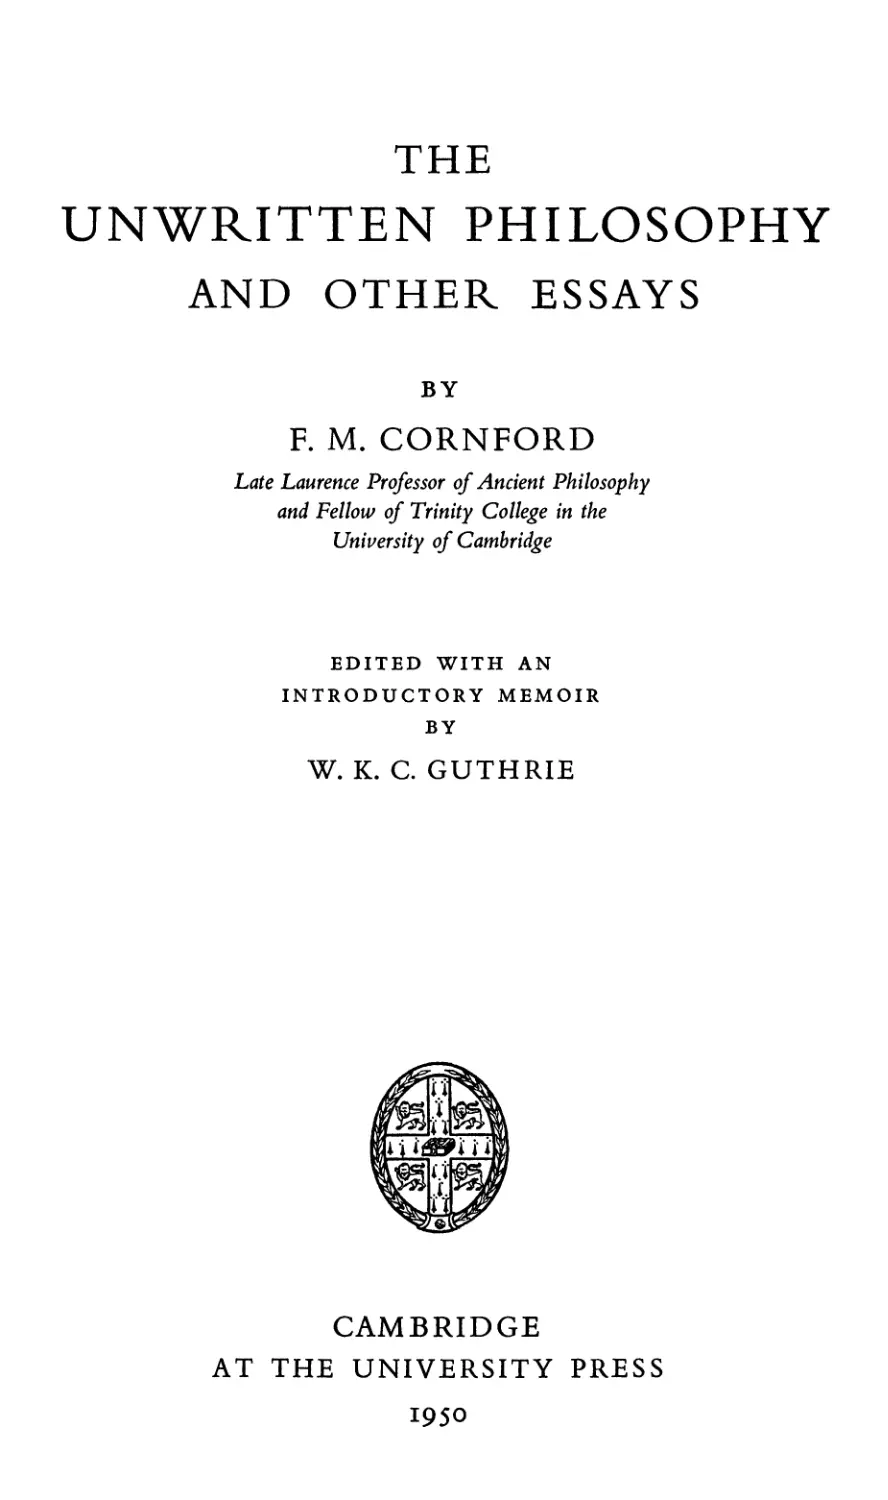 THE UNWRITTEN PHILOSOPHY AND OTHER ESSAYS BY F. M. CORNFORD